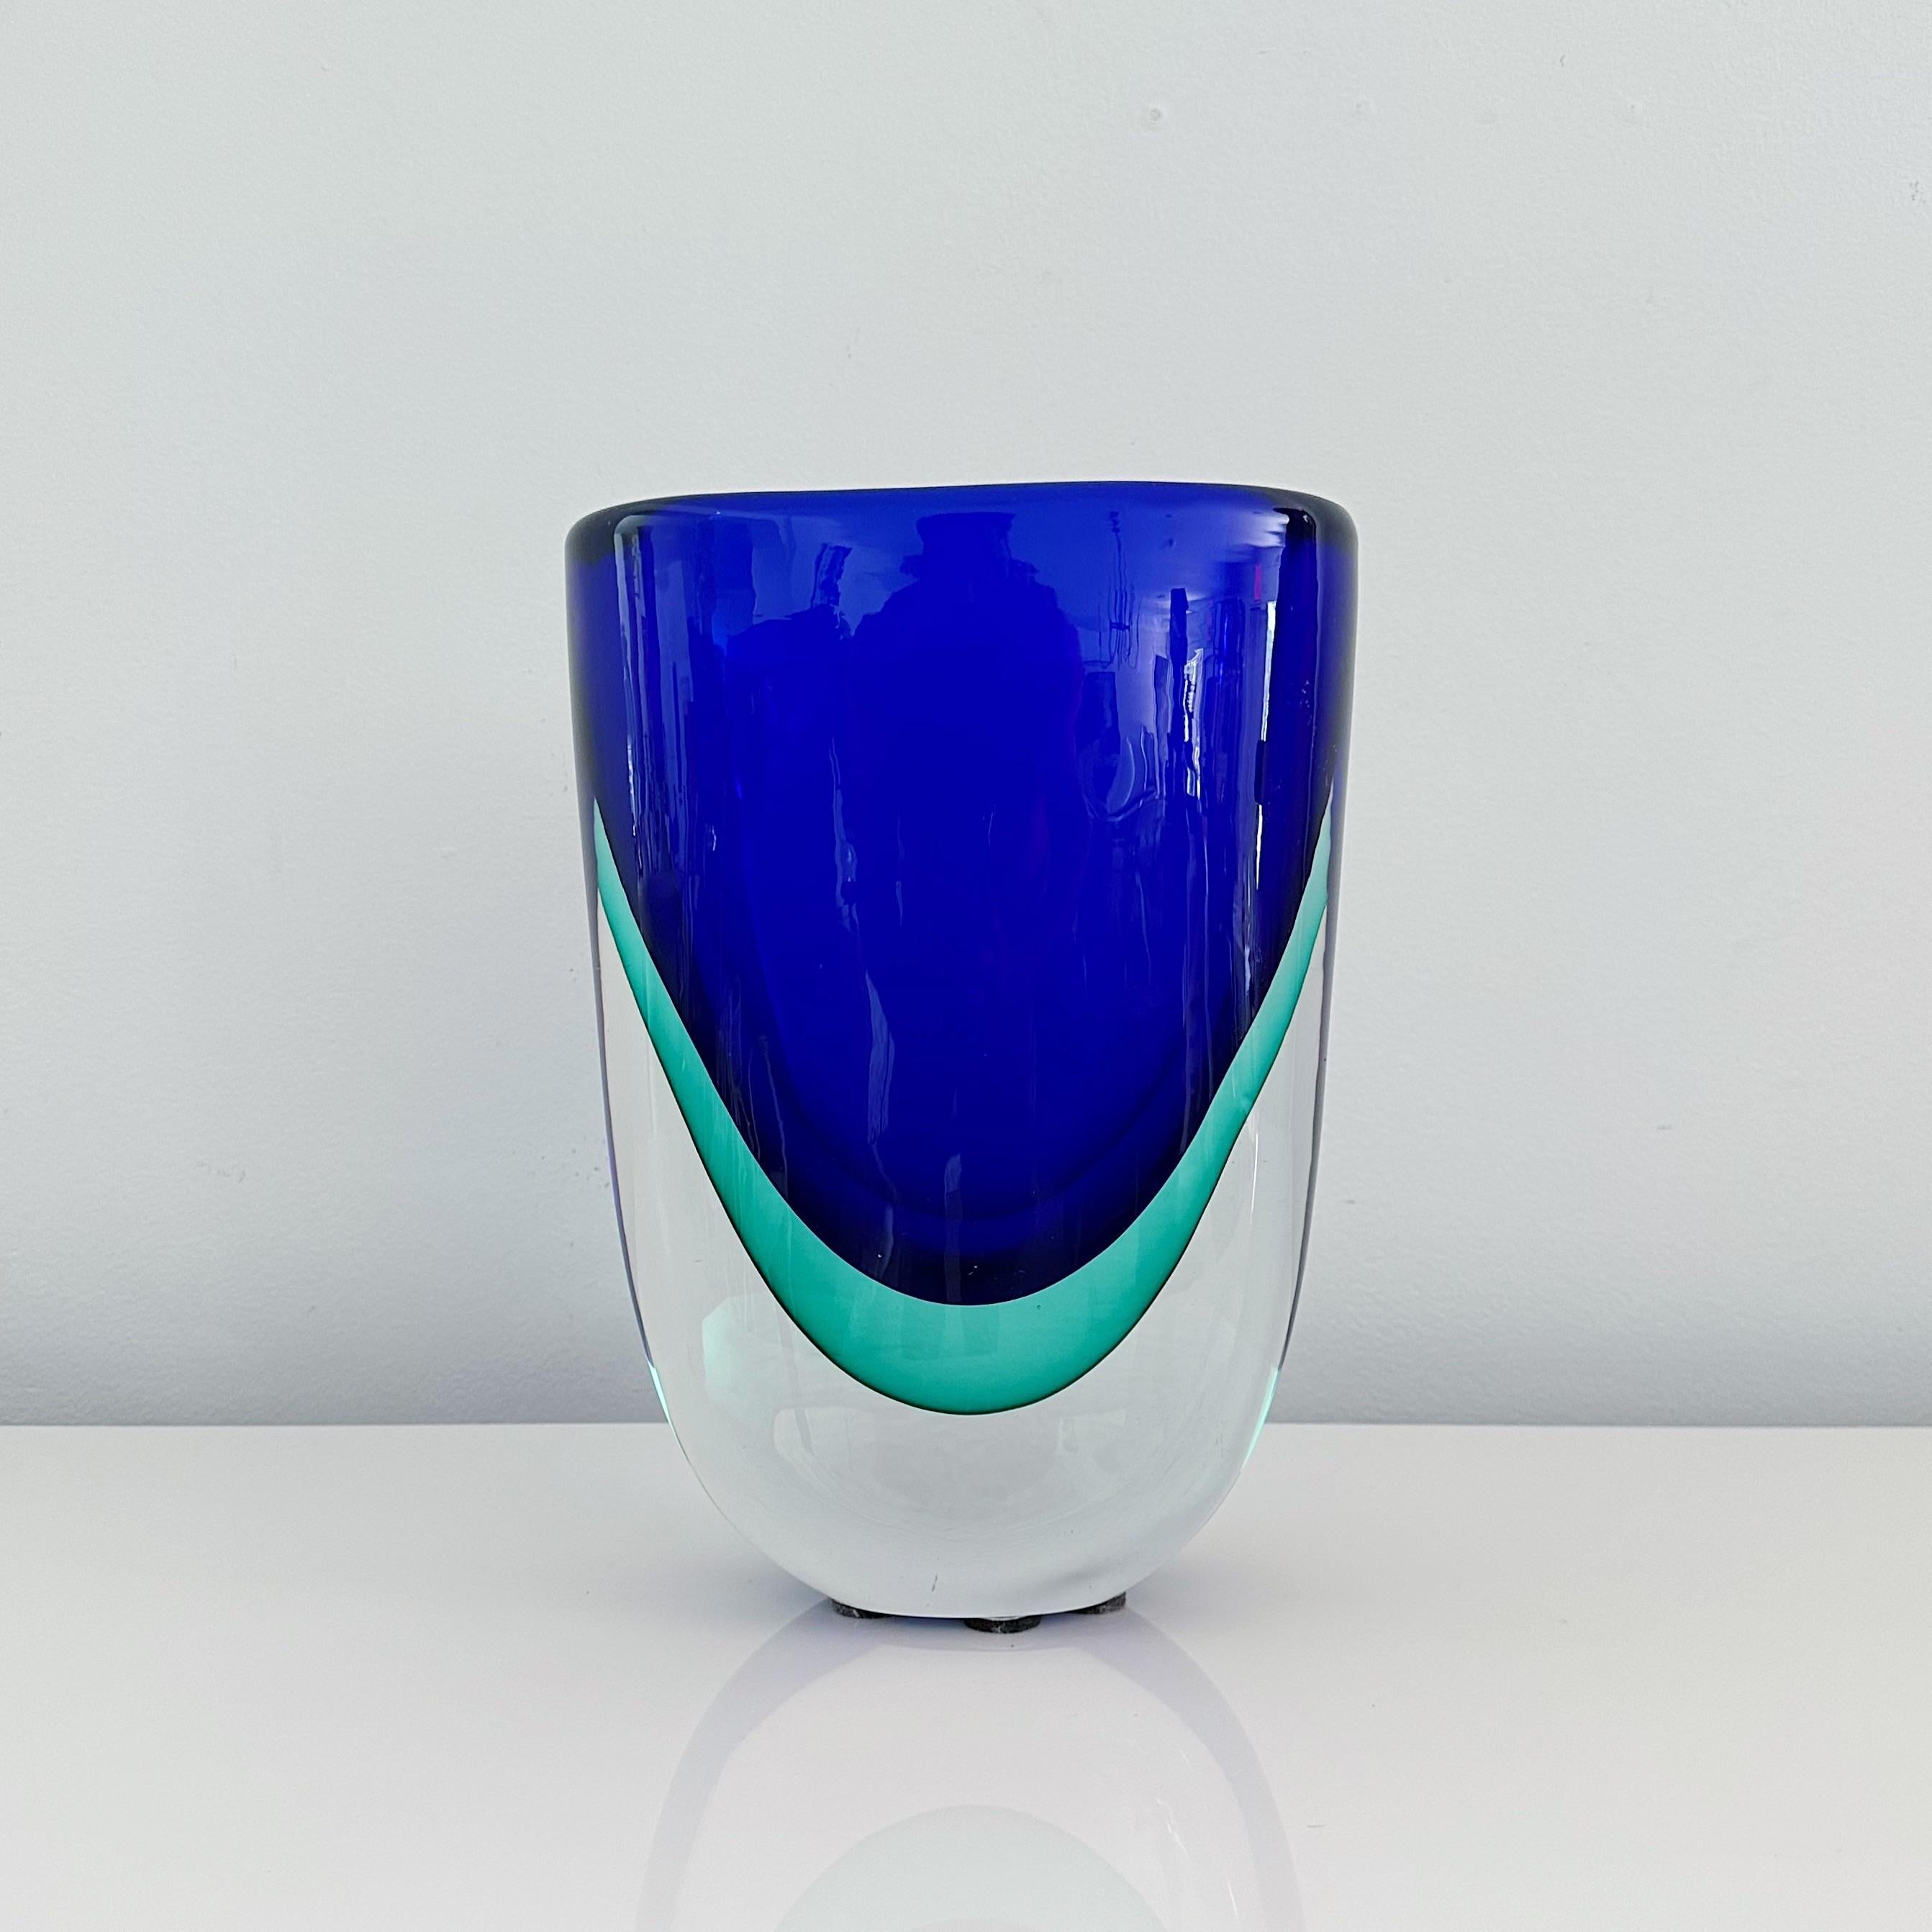 Hand-Crafted Stefano Toso Sommerso Murano Vase Circa 2001